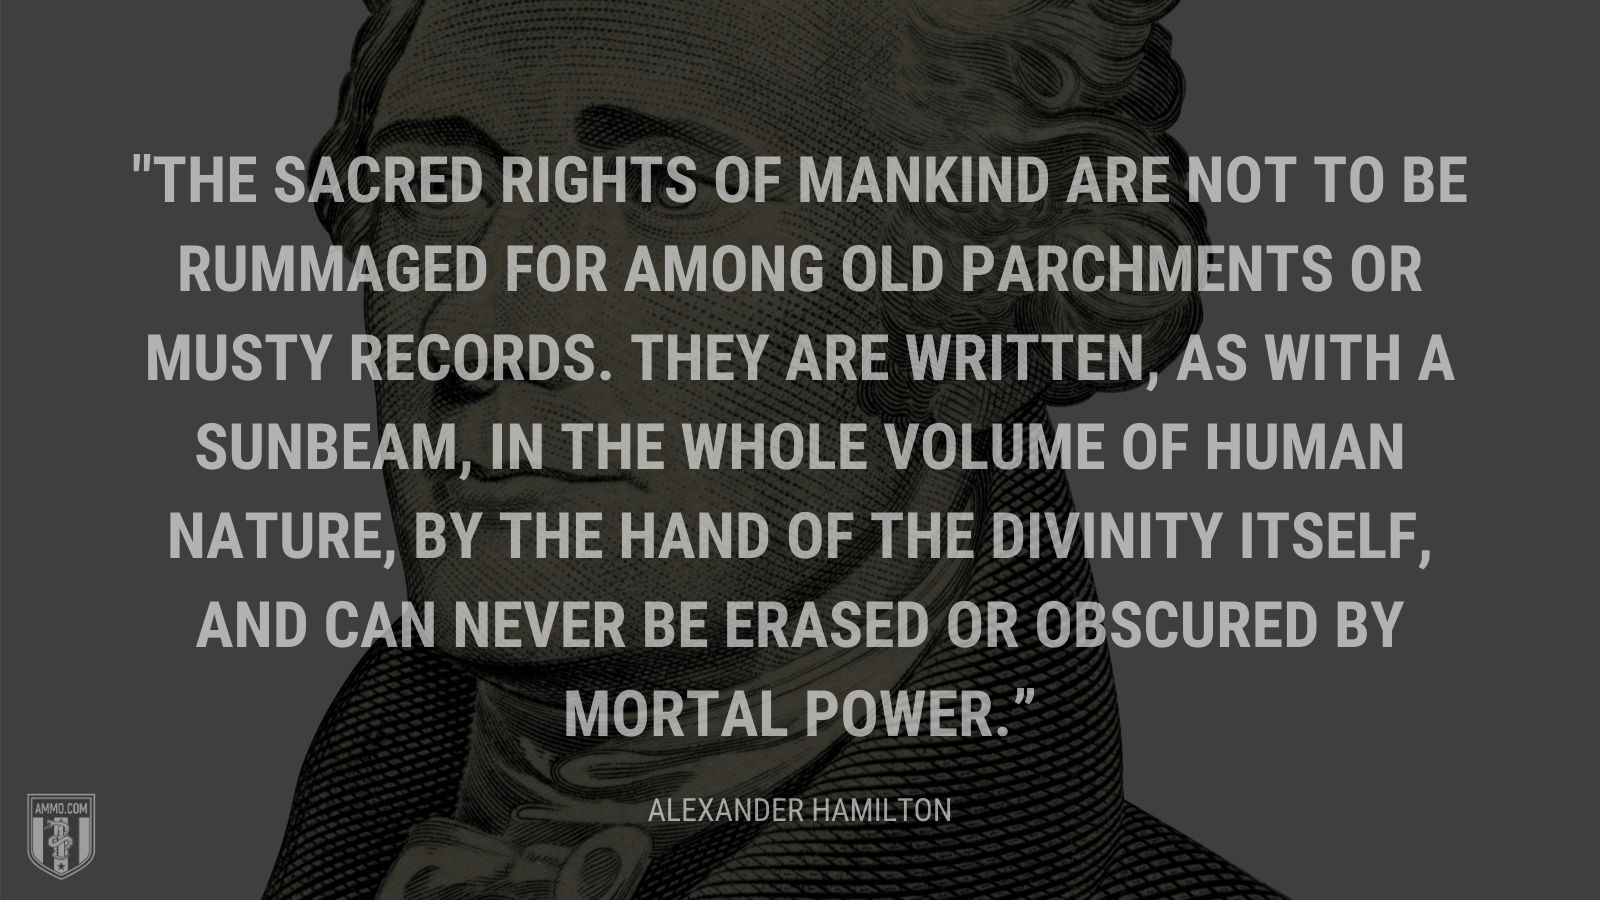 “The sacred rights of mankind are not to be rummaged for among old parchments or musty records. They are written, as with a sunbeam, in the whole volume of human nature, by the hand of the divinity itself, and can never be erased or obscured by mortal power.” - Alexander Hamilton